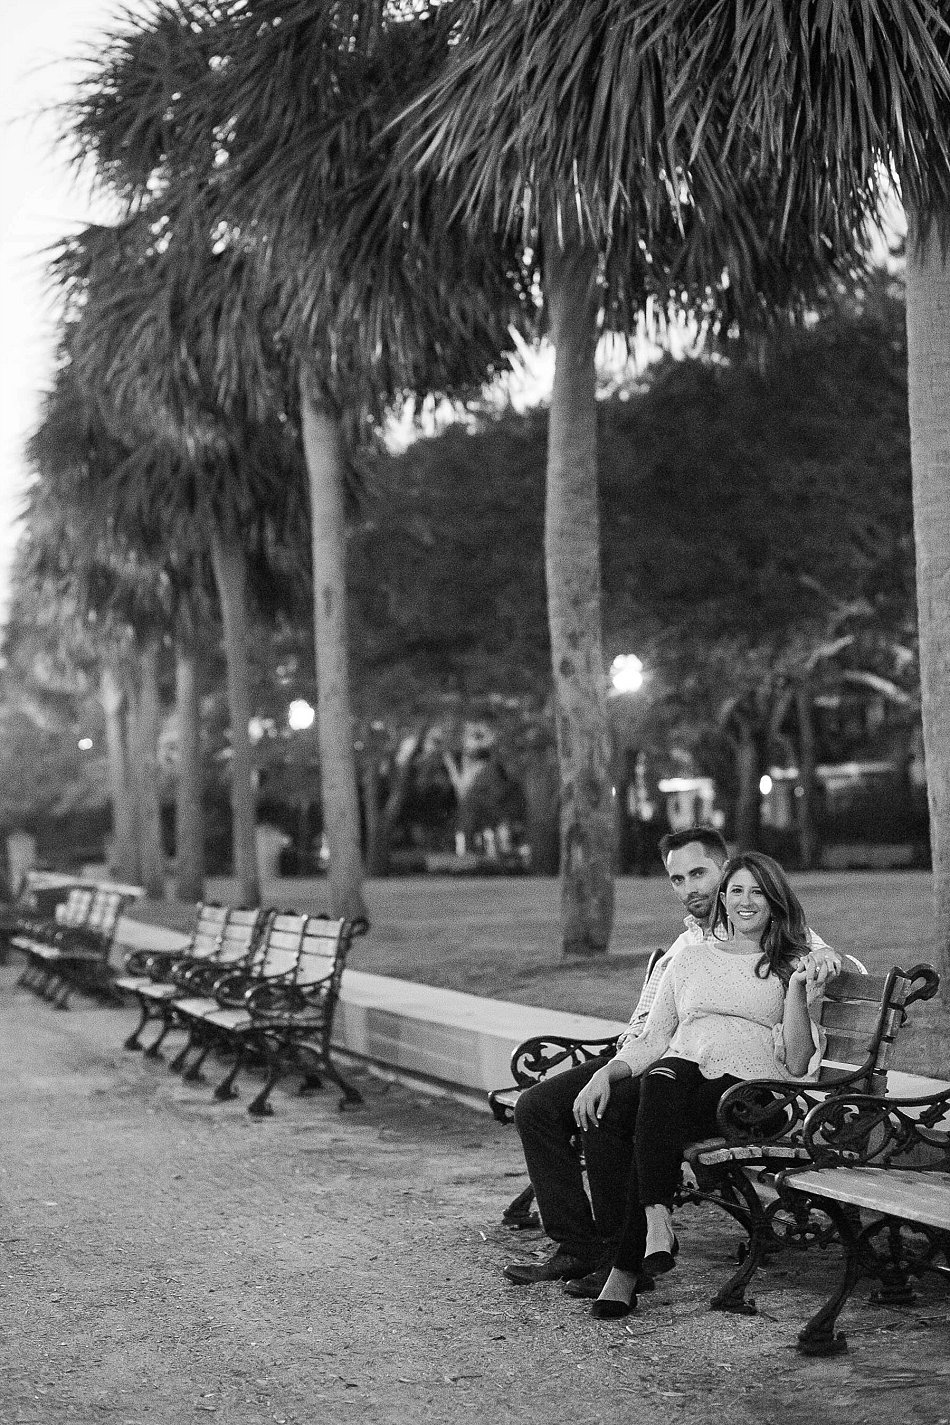 Charleston Honeymoon Photography in the Waterfront Park. Kate Timbers Photography. http://katetimbers.com #katetimbersphotography // Charleston Photography // Inspiration